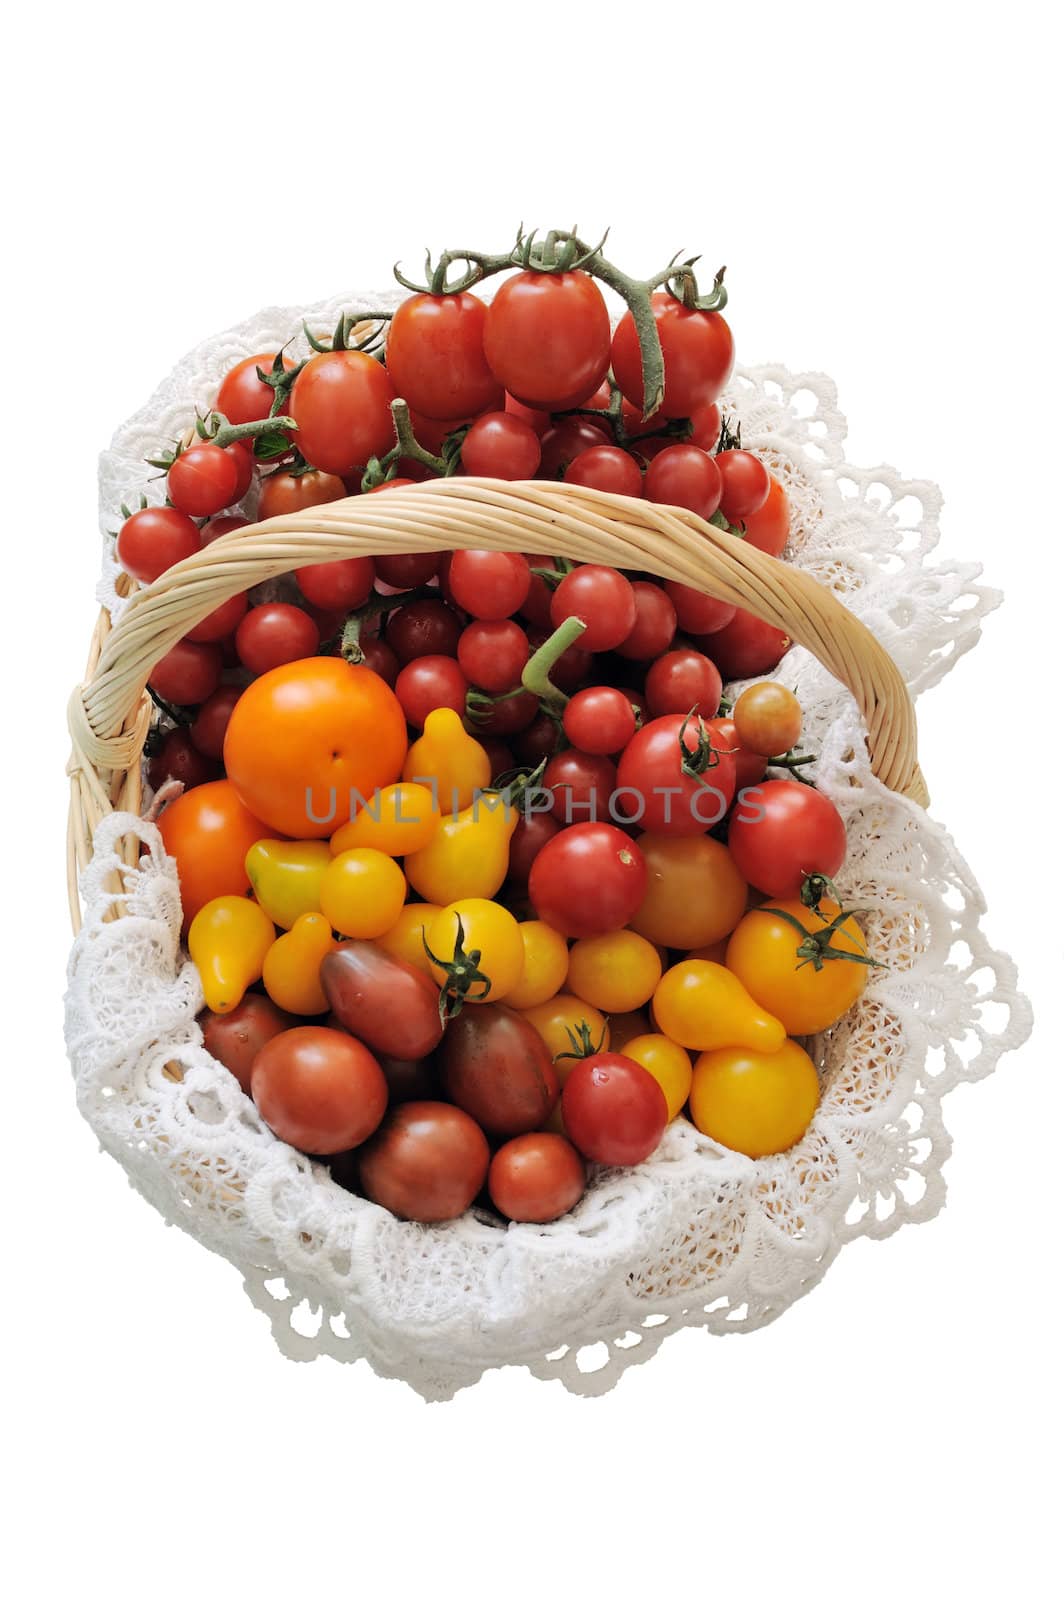 Different varieties of tomatoes in a basket by Apolonia